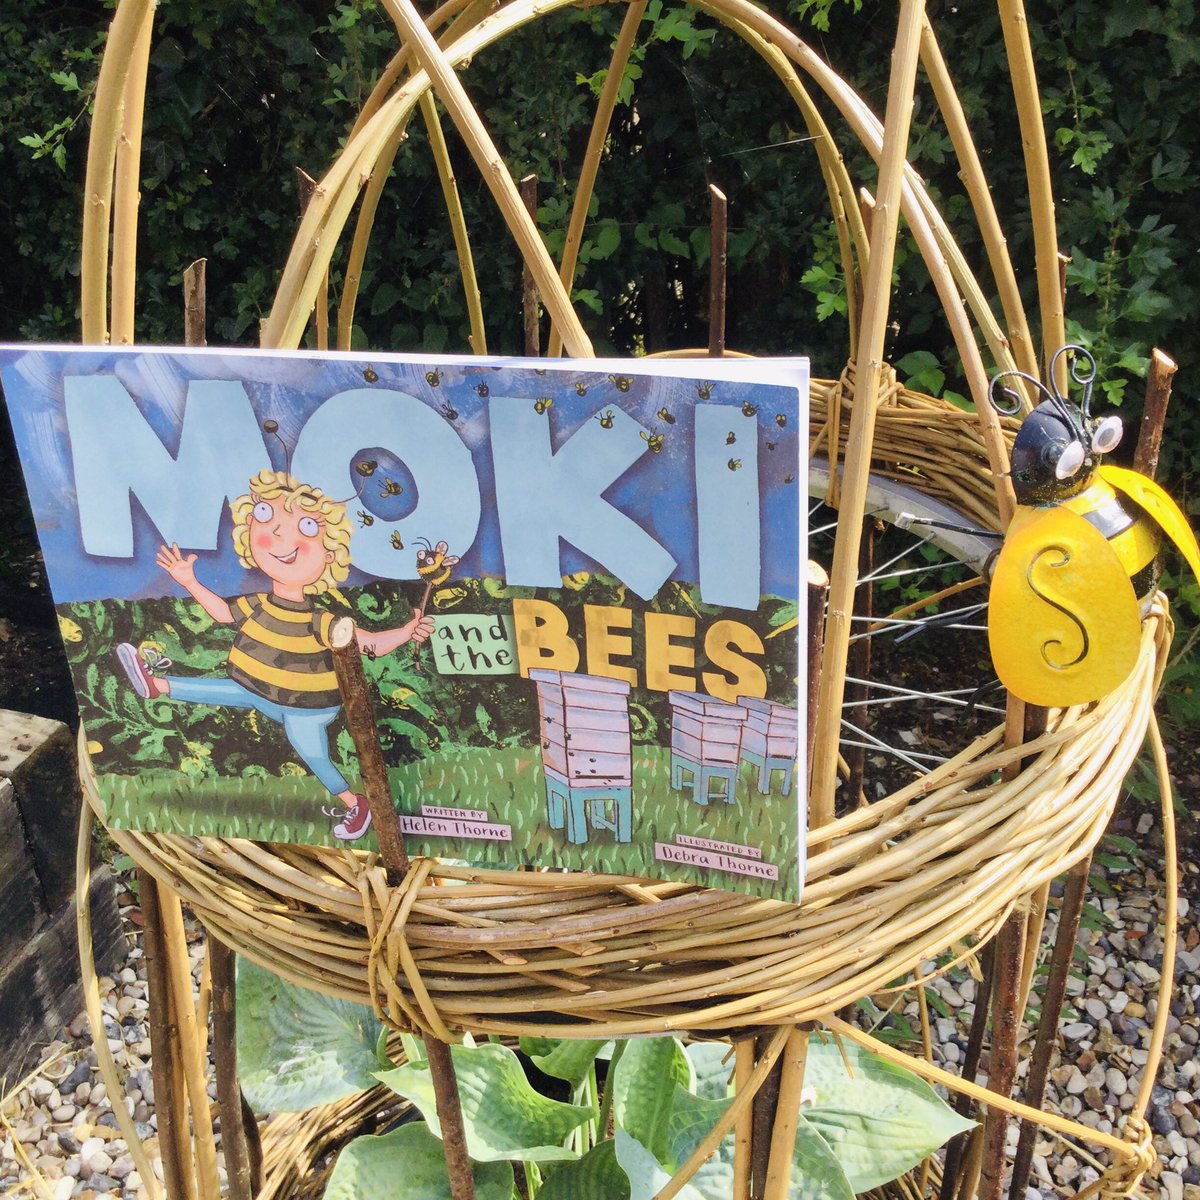 🐝 Local author Helen Thorne will be in school on Friday for a reading and signing session for her finished book 'Moki and the Bees'. Books are priced at £5, honey (per jar) is £6 or for both £10.
#kerseyschool #author #authorvisit #bees #honey #mokiandthebees @TheTilian